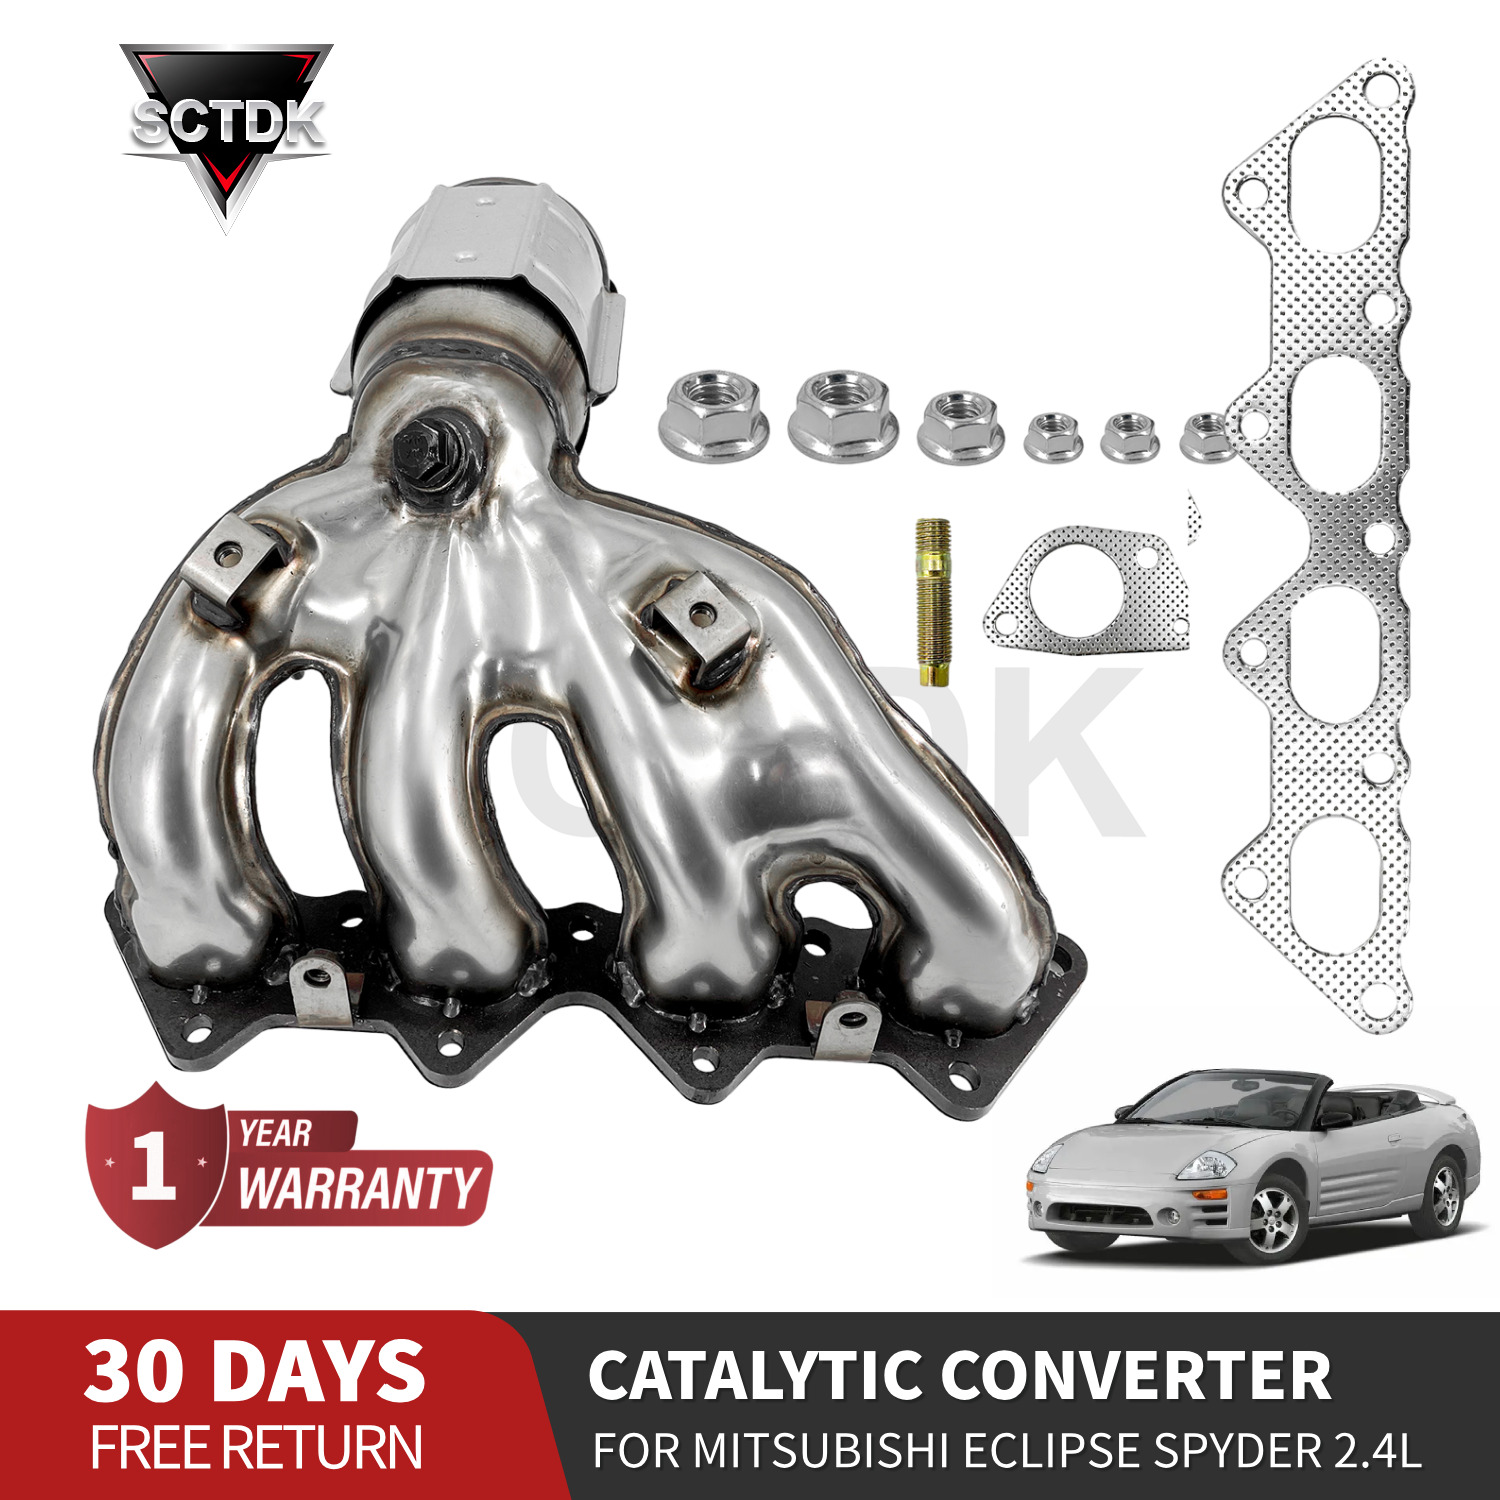 Exhaust Catalytic Converter Manifold for 2001-05 Eclipse Spyder Mitsubishi 2.4L 